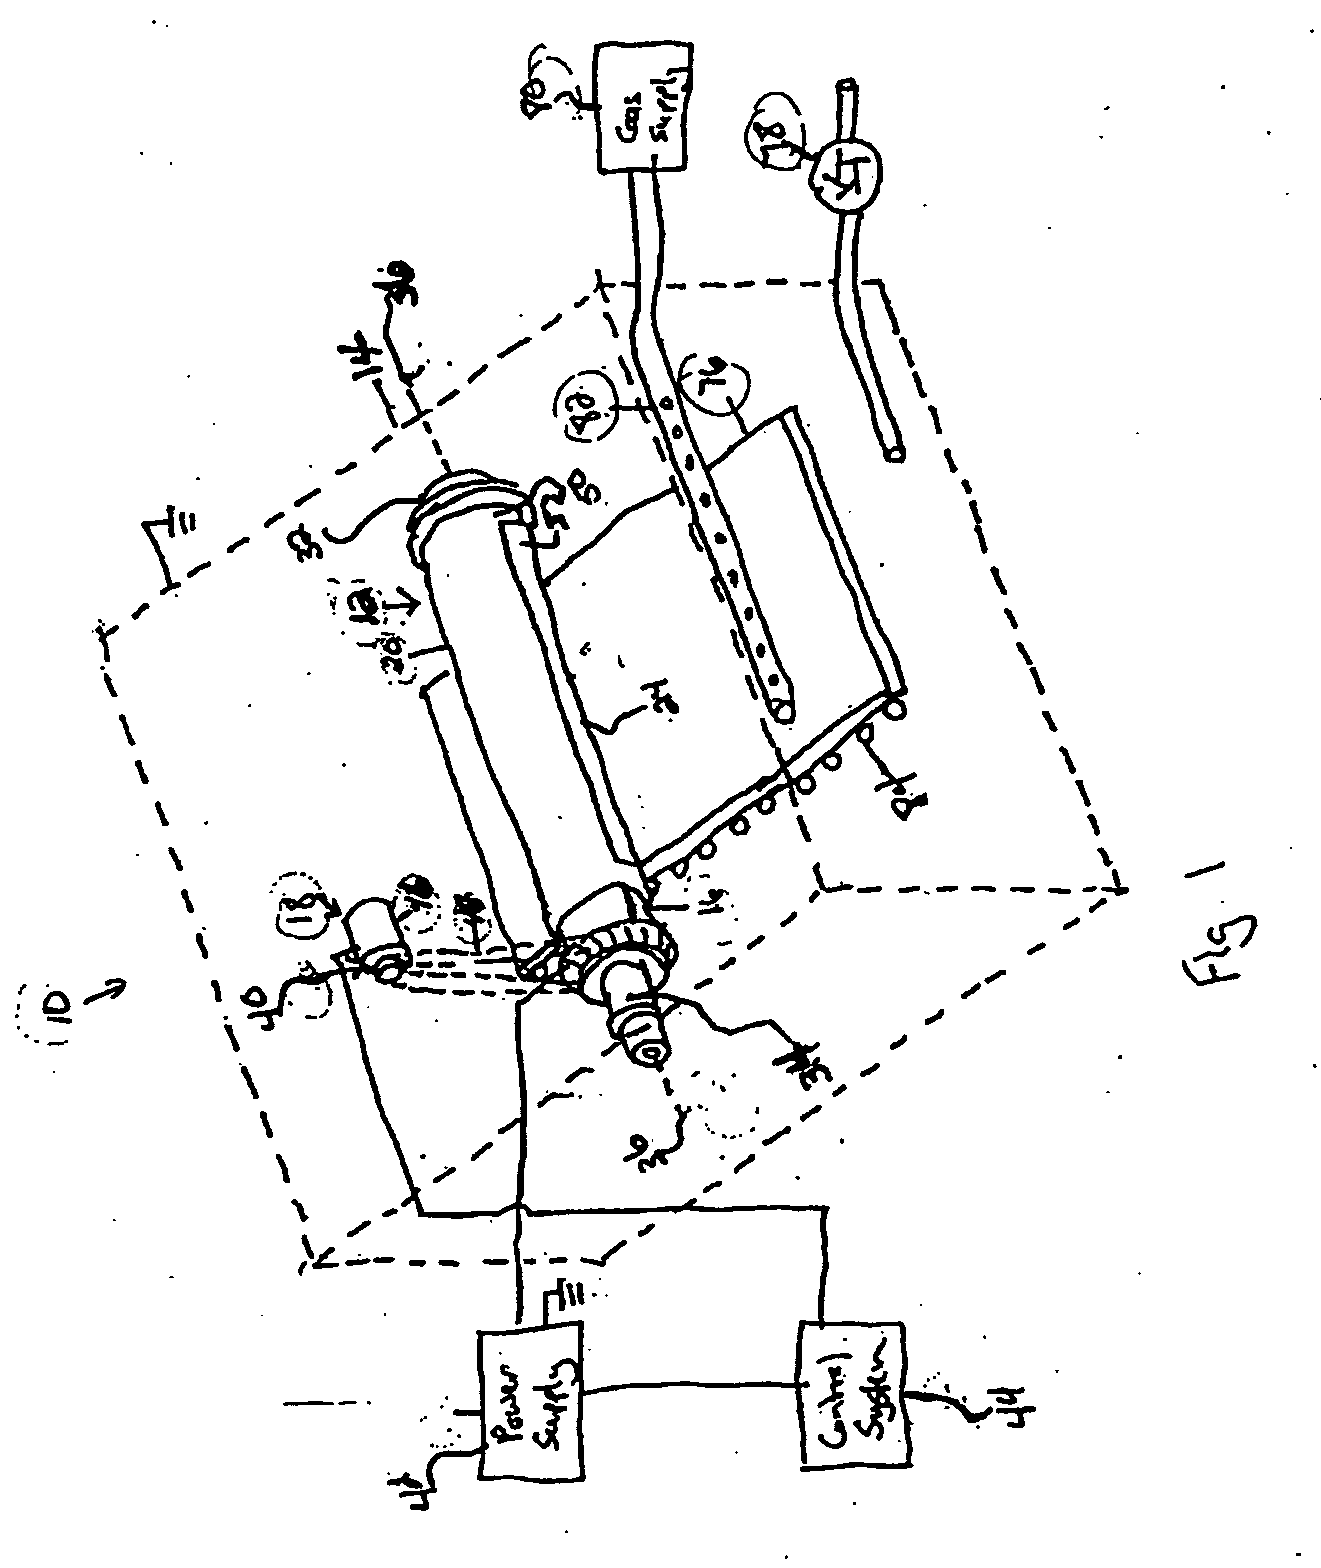 Oscillating shielded cylindrical target assemblies and their methods of use